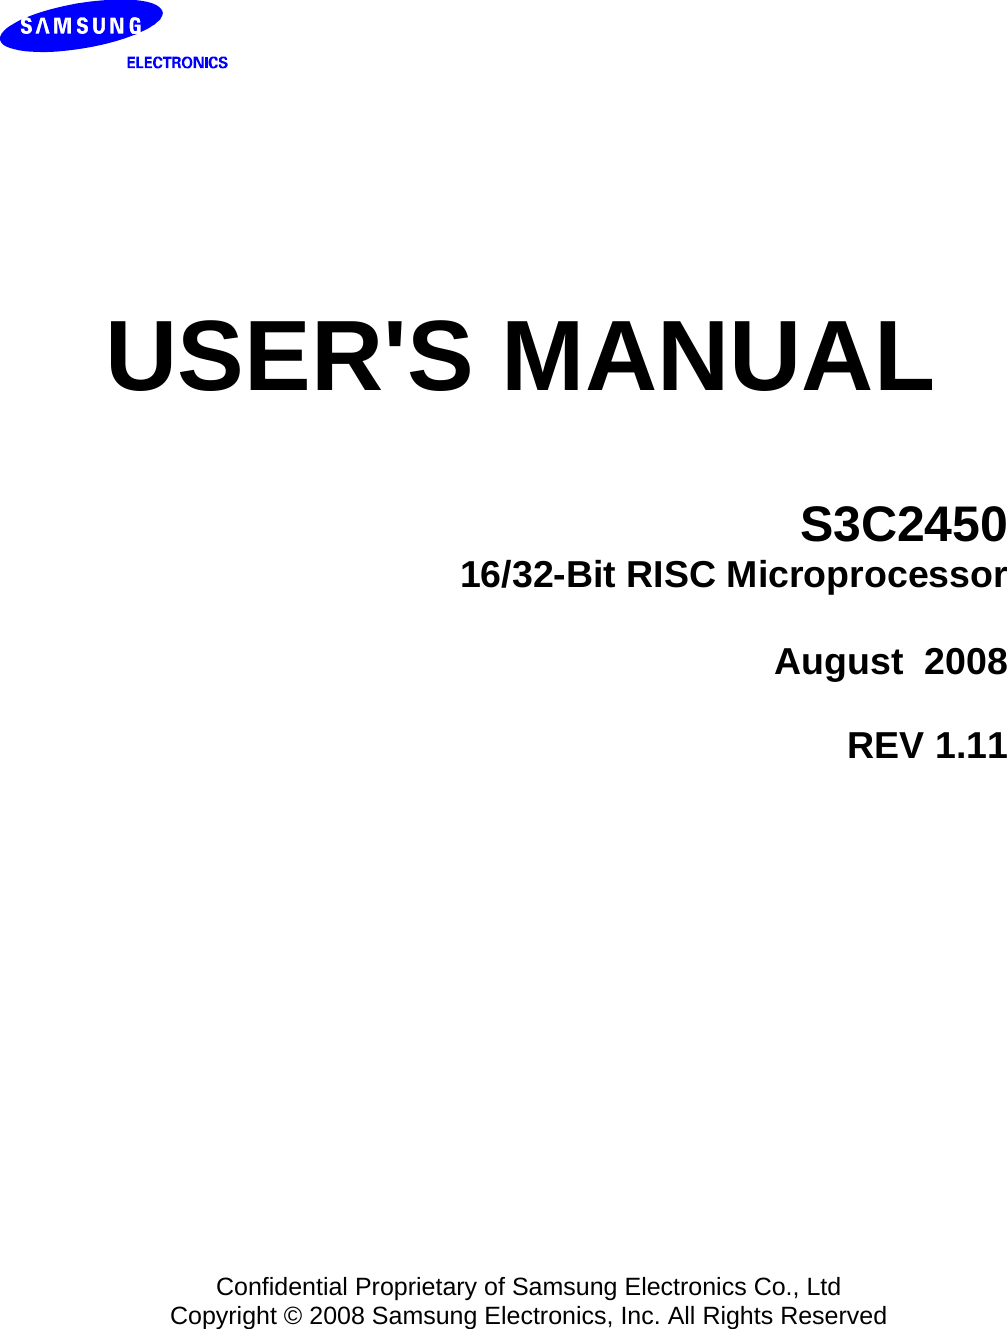   USER&apos;S MANUAL S3C2450 16/32-Bit RISC Microprocessor  August  2008 REV 1.11   Confidential Proprietary of Samsung Electronics Co., Ltd Copyright © 2008 Samsung Electronics, Inc. All Rights Reserved 